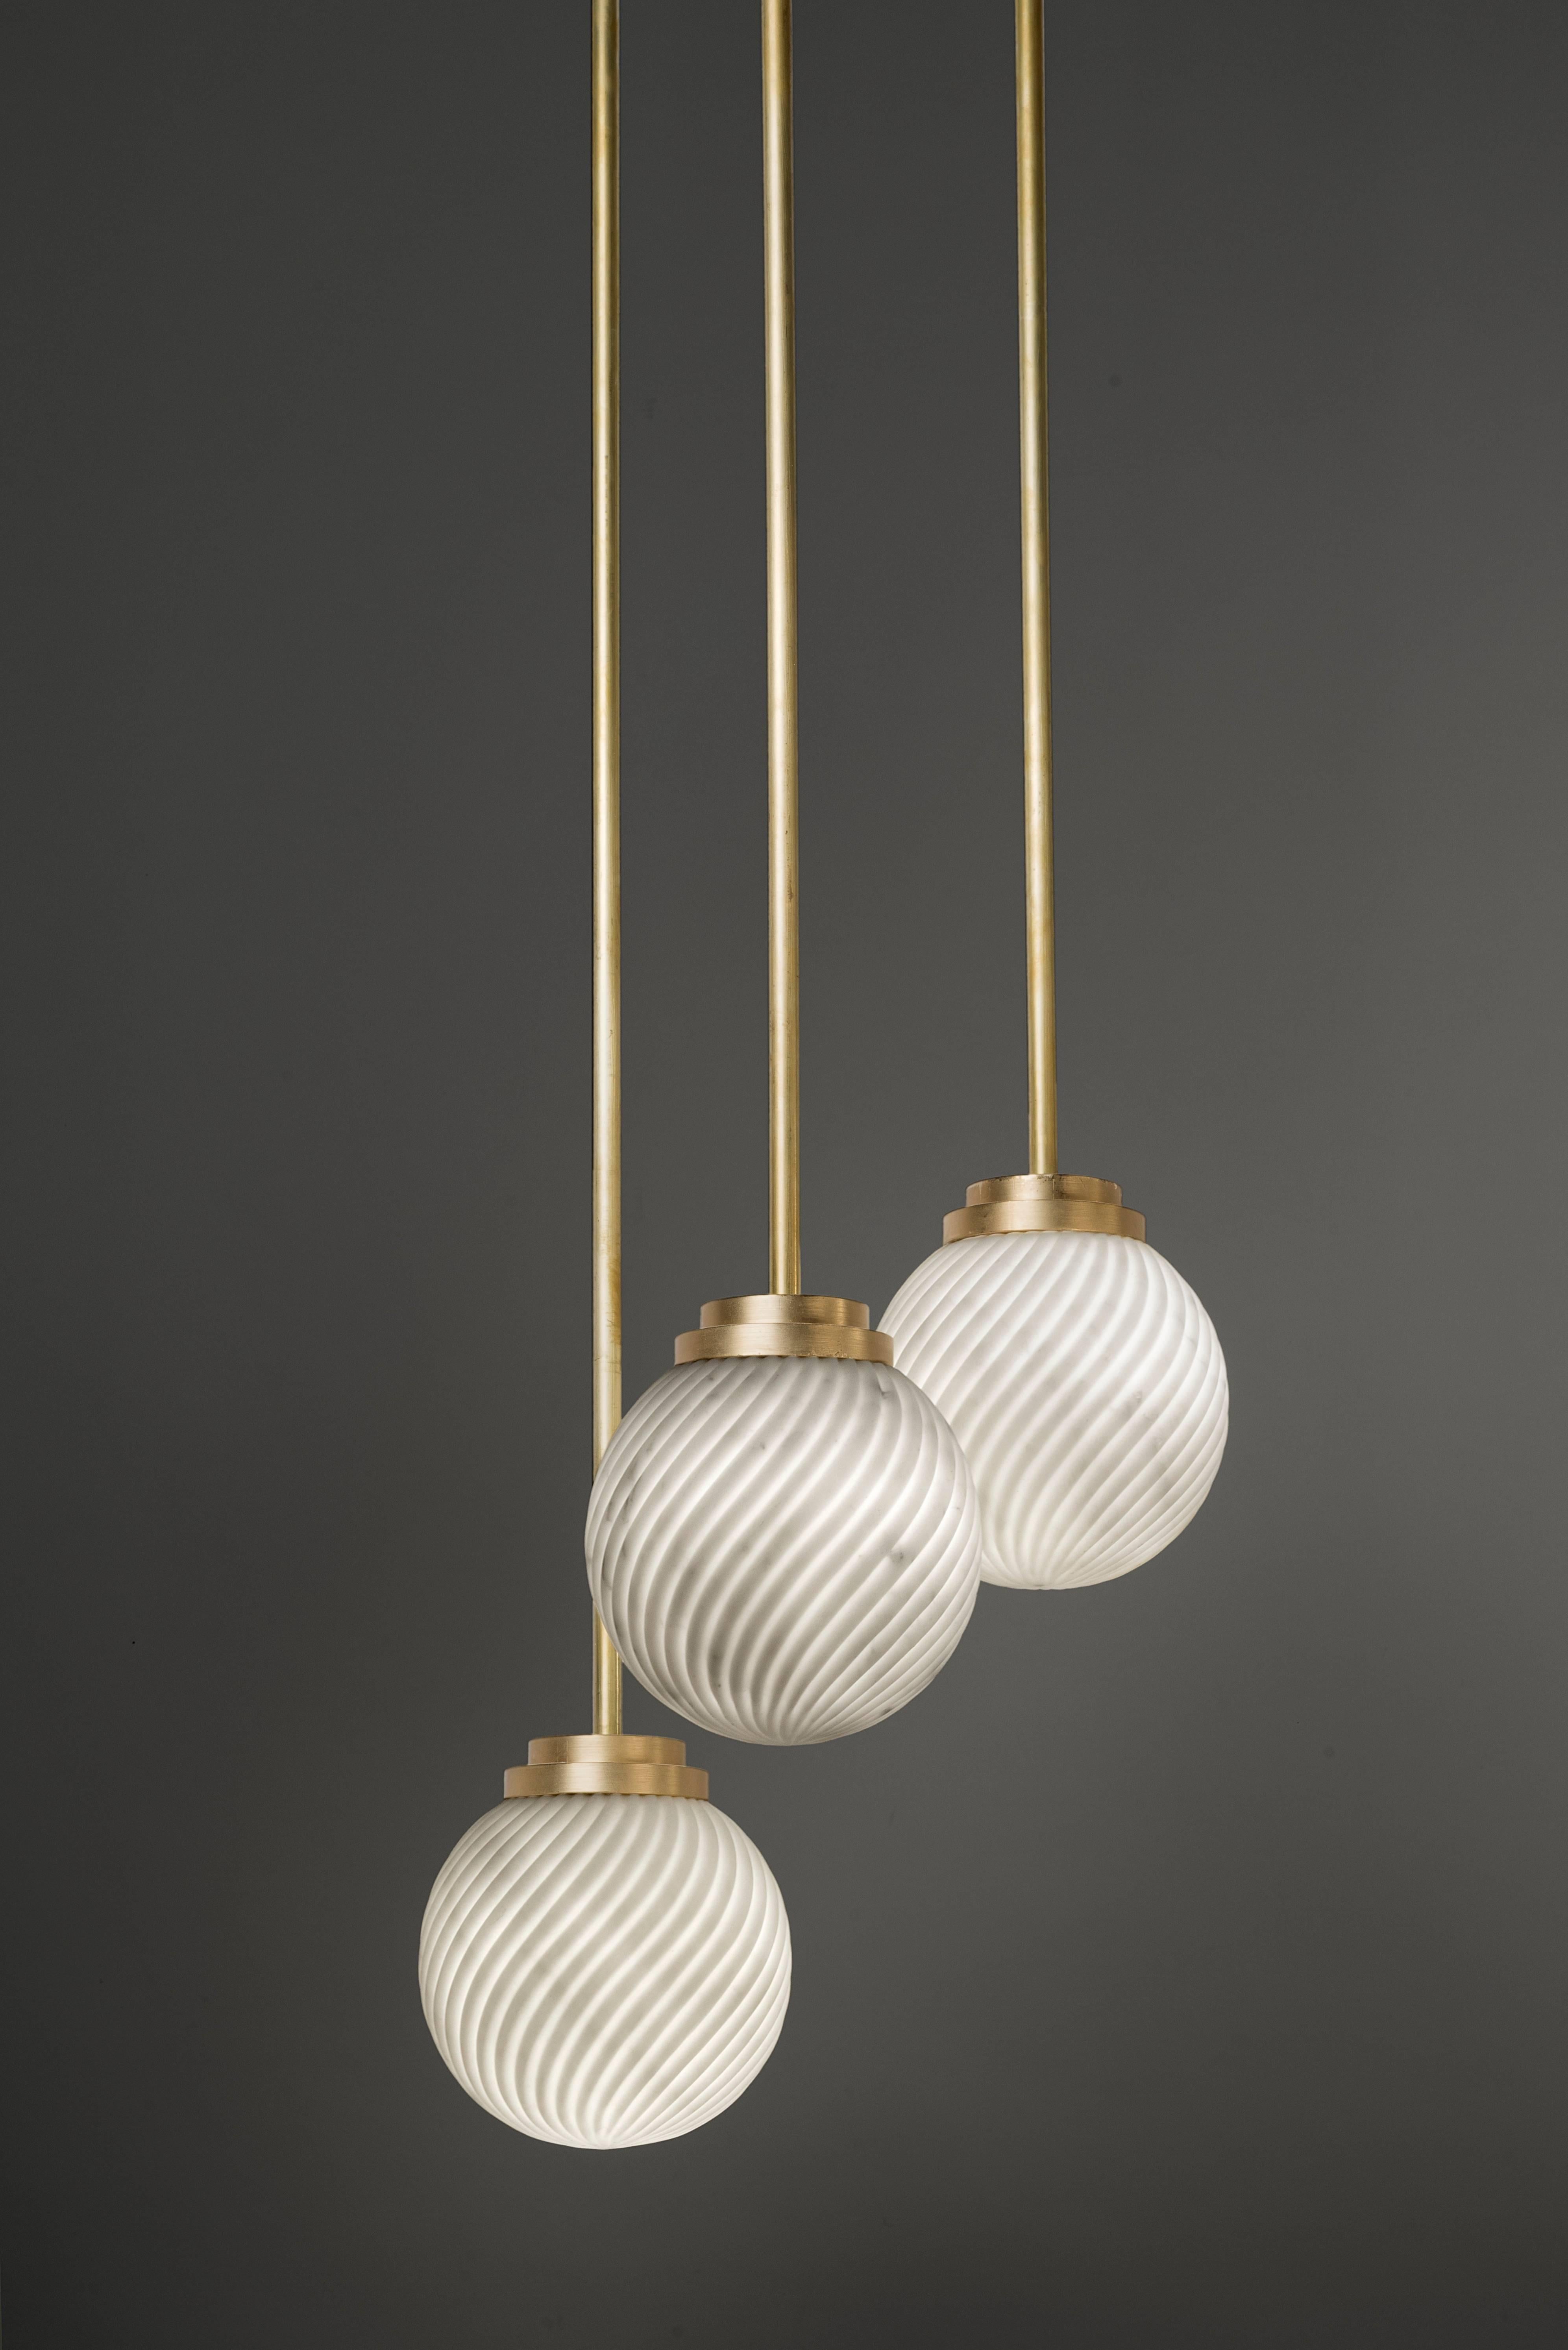 Victoria lighting celebrates the delicacy of Arabescato marble and brushed brass, protagonists of the iconic Victoria tea set. The collection is handmade in Italy and comprises a table lamp, a wall lamp, a pedant light and a chandelier of three